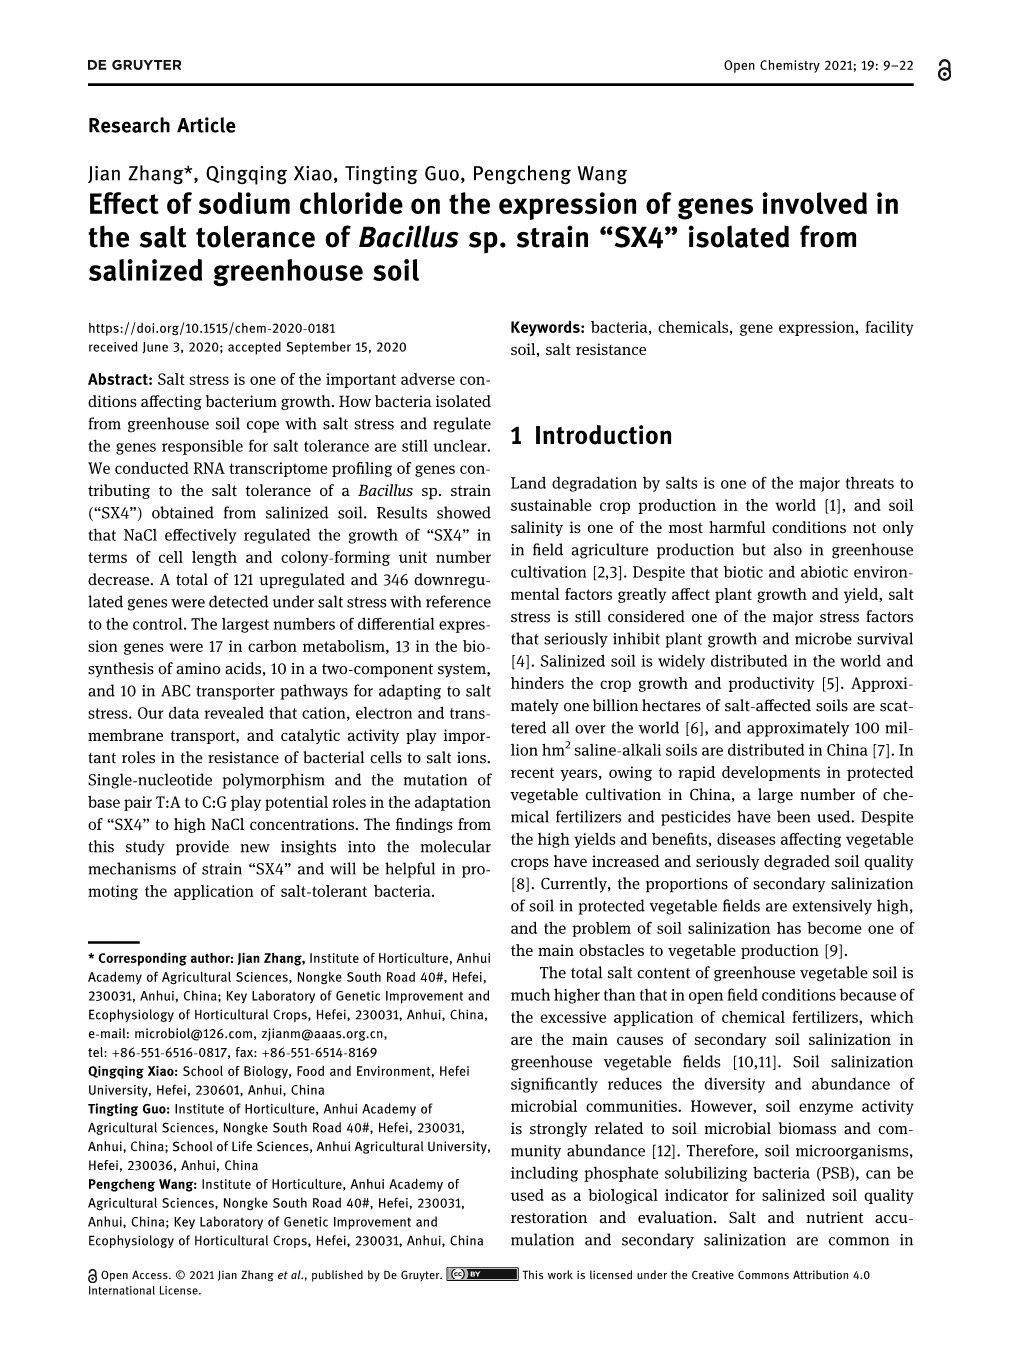 Effect of Sodium Chloride on the Expression of Genes Involved in the Salt Tolerance of Bacillus Sp. Strain